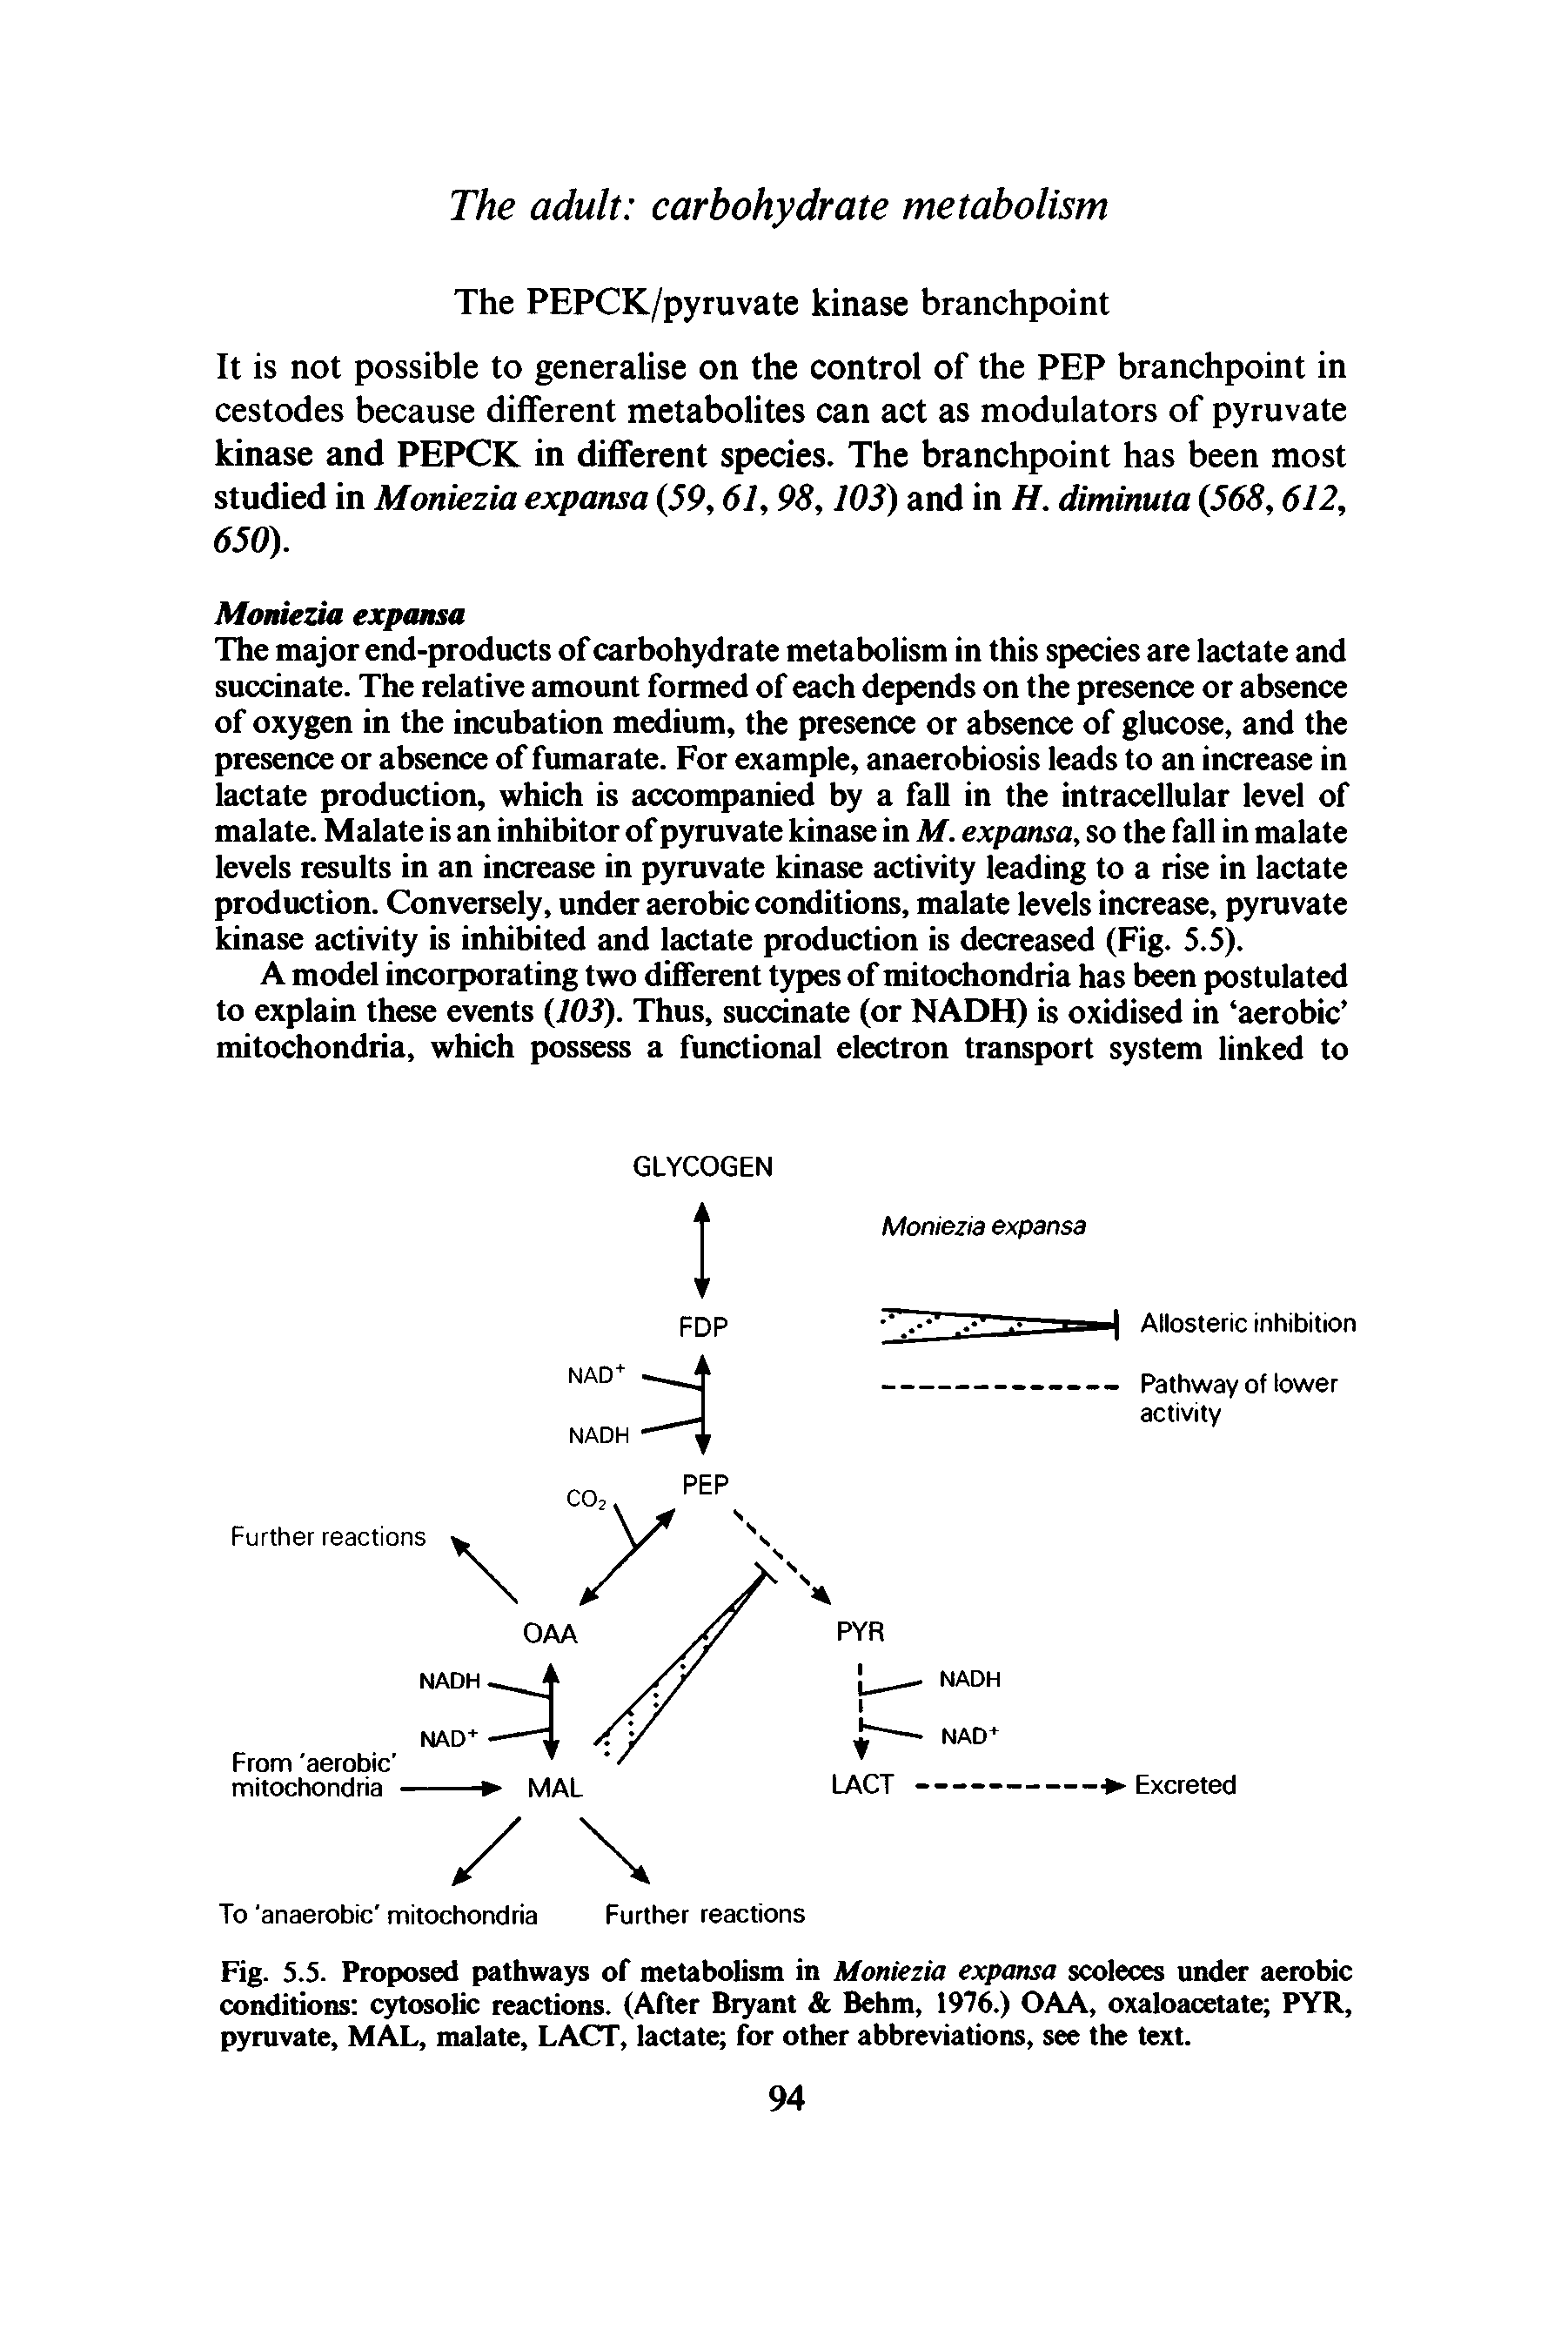 Fig. 5.5. Proposed pathways of metabolism in Moniezia expansa scoleces under aerobic conditions cytosolic reactions. (After Bryant Behm, 1976.) OAA, oxaloacetate PYR, pyruvate, MAL, malate, LACT, lactate for other abbreviations, see the text.